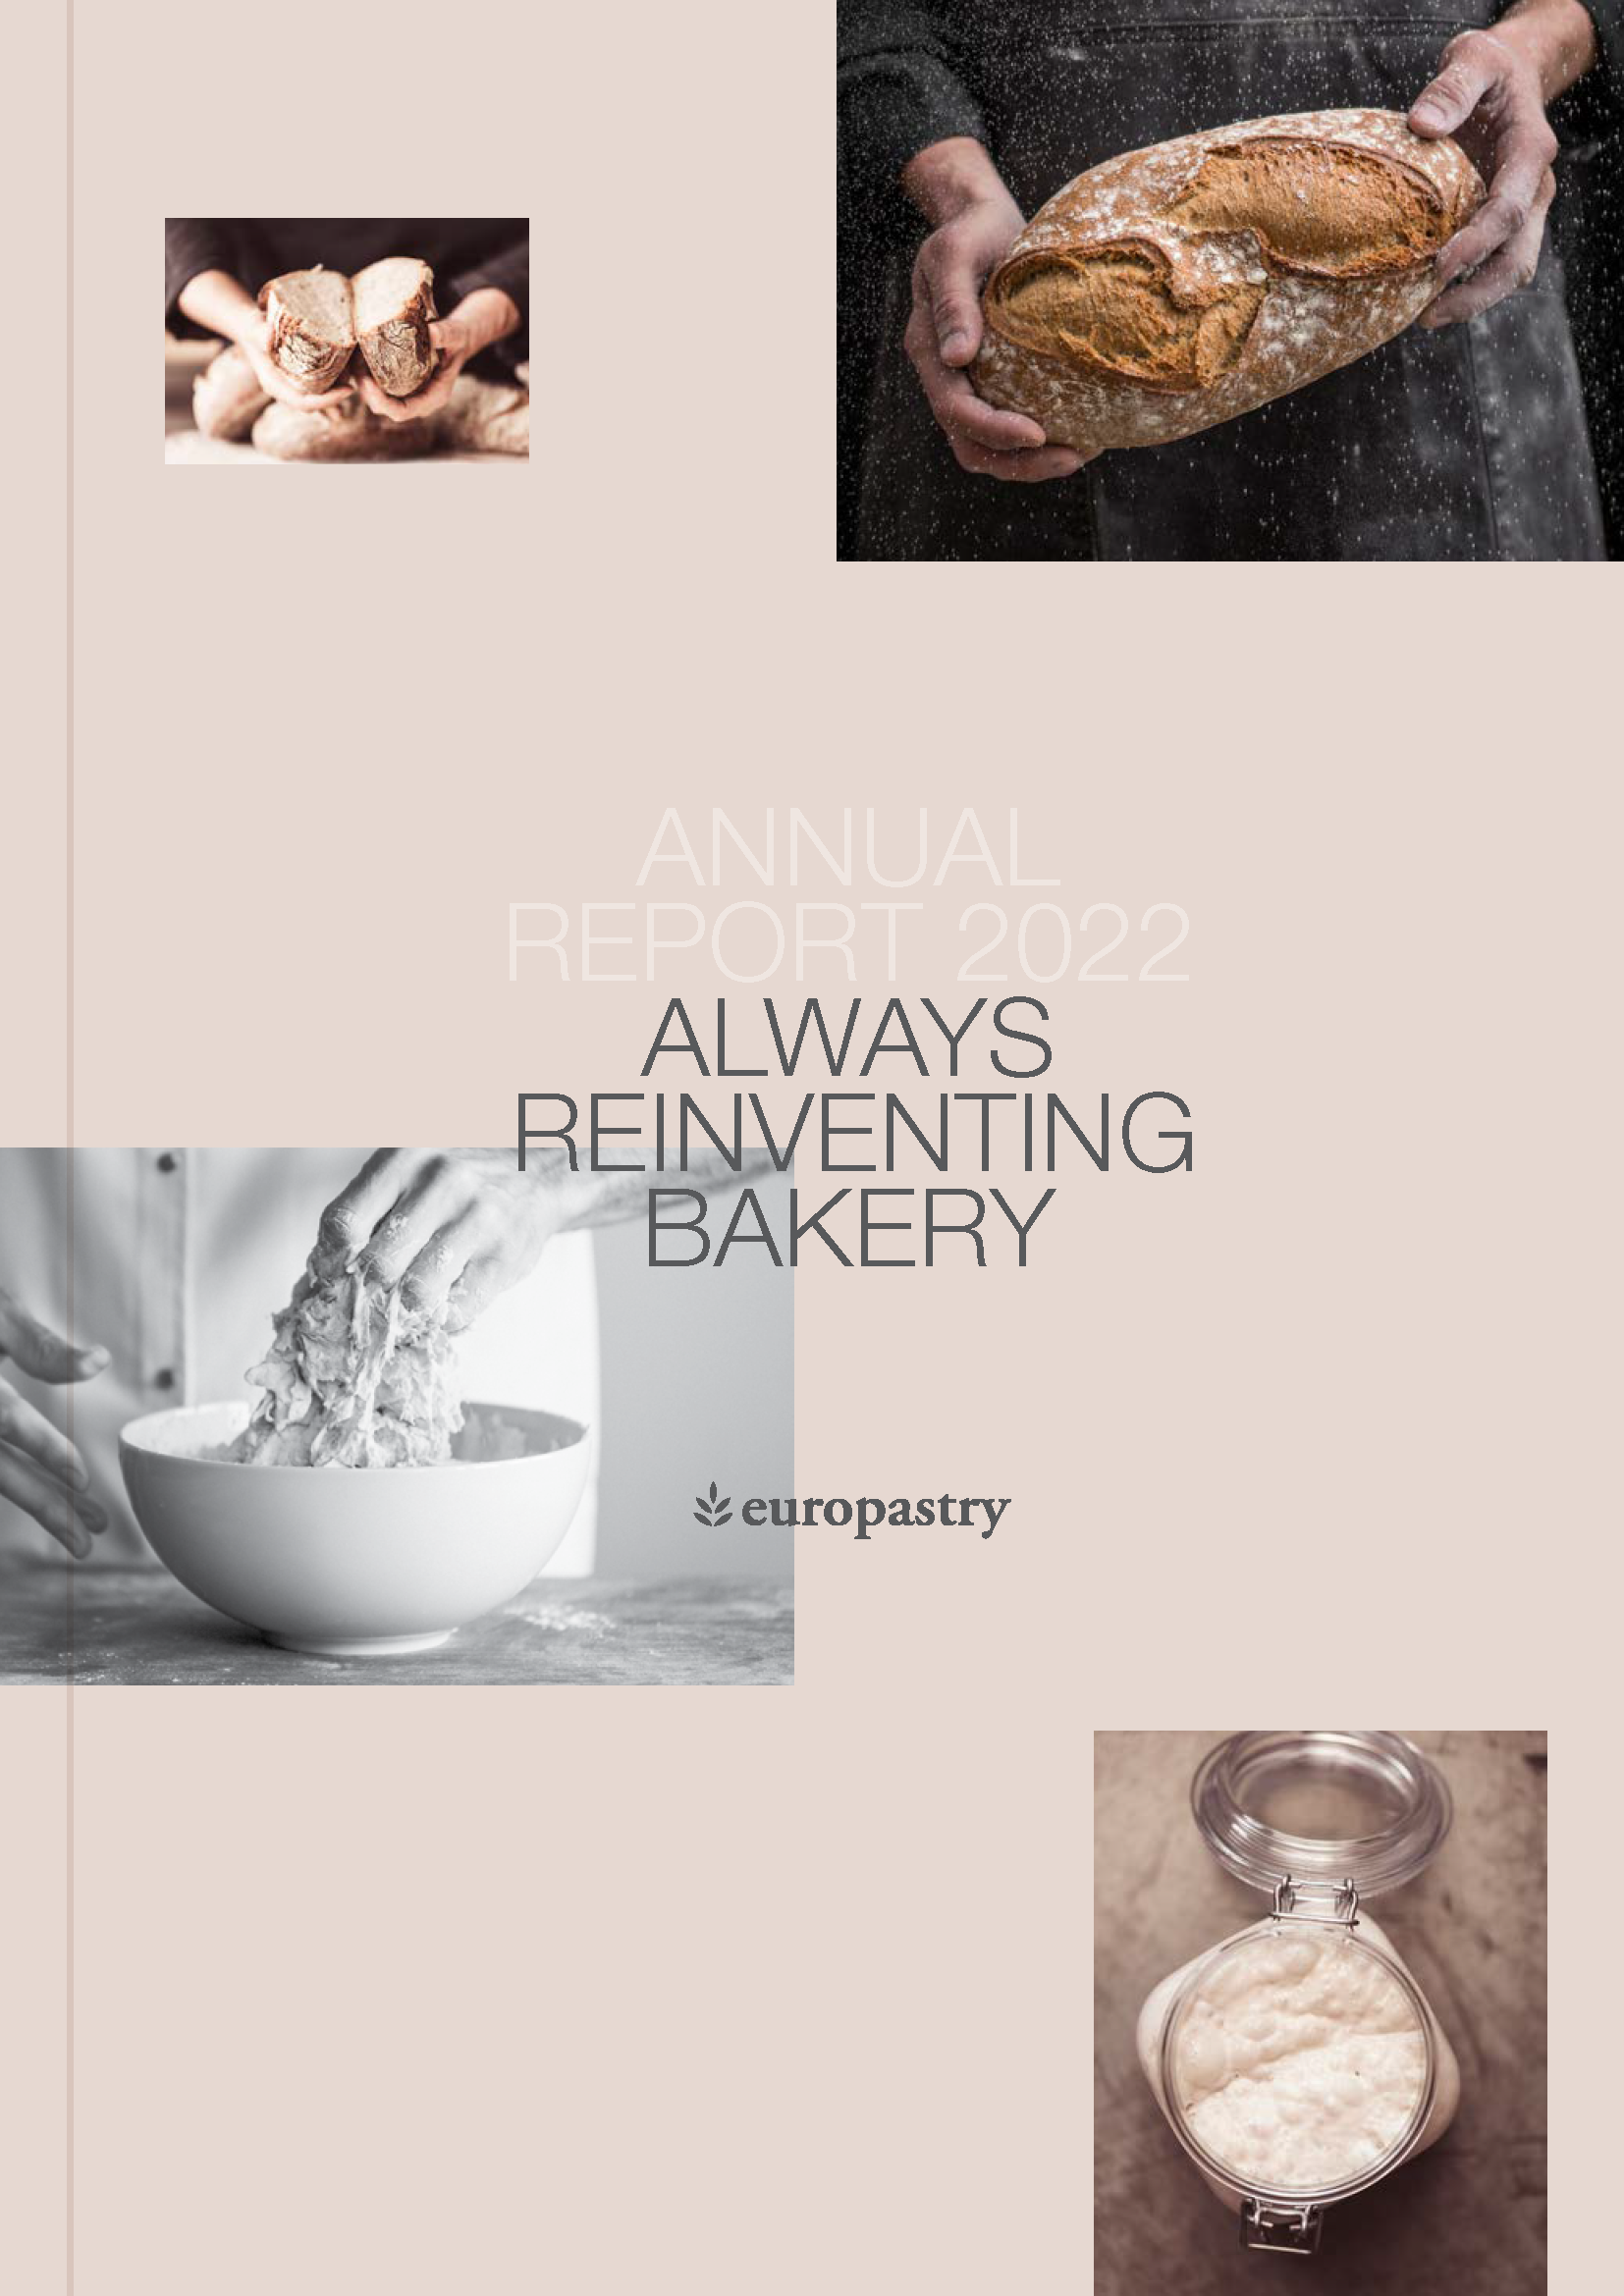 Cover page for Europastry USA's 2022 Annual Report.